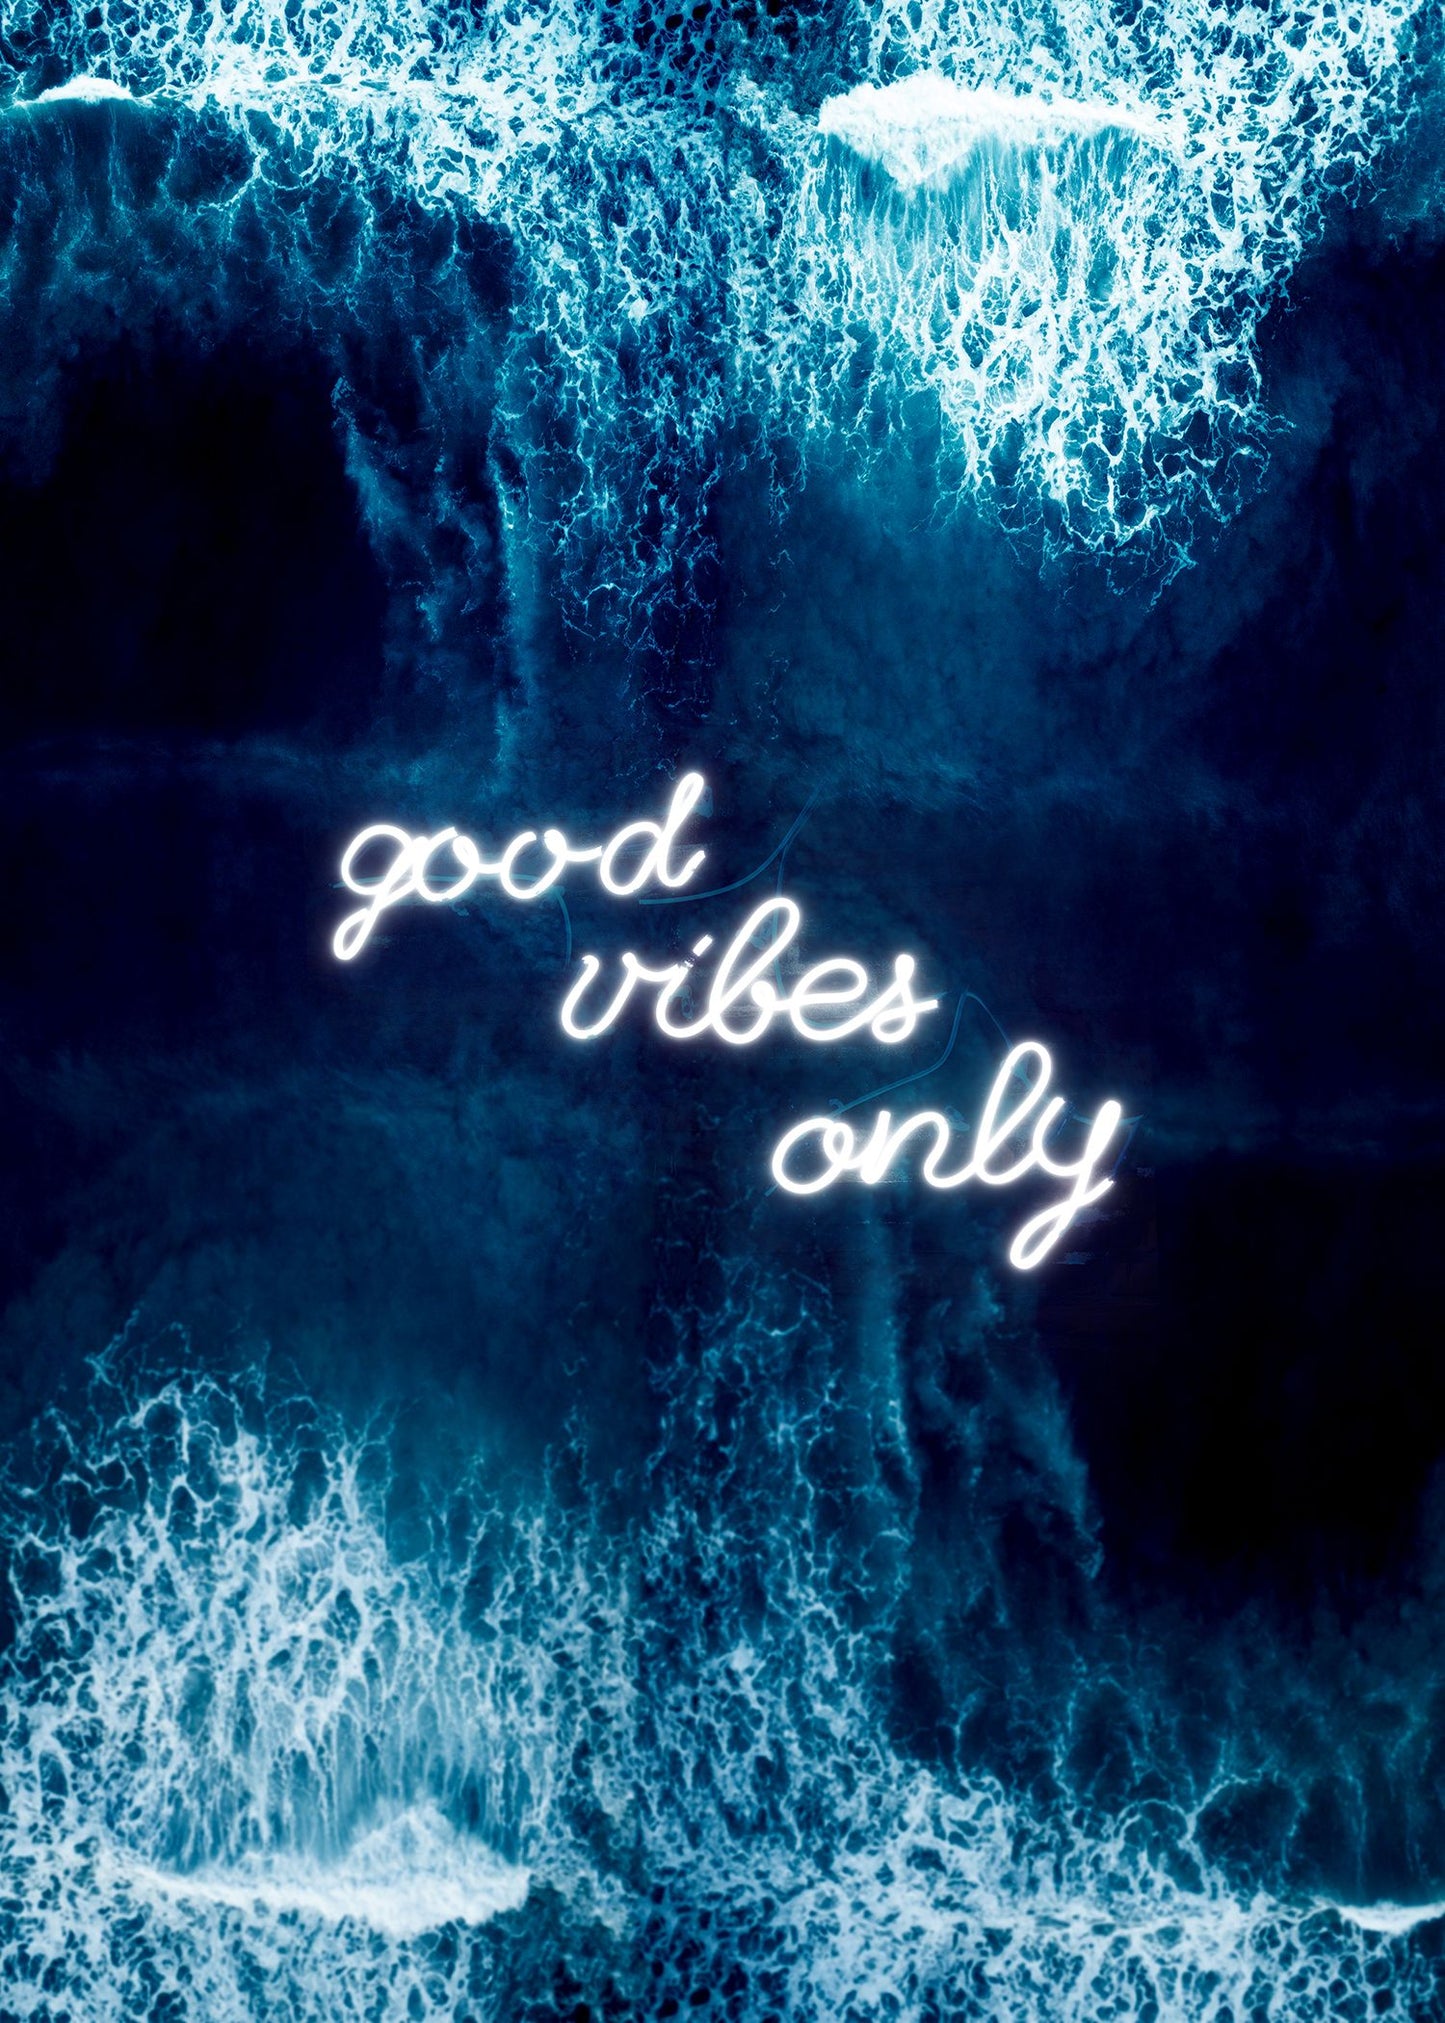 Good Vibes Only Print